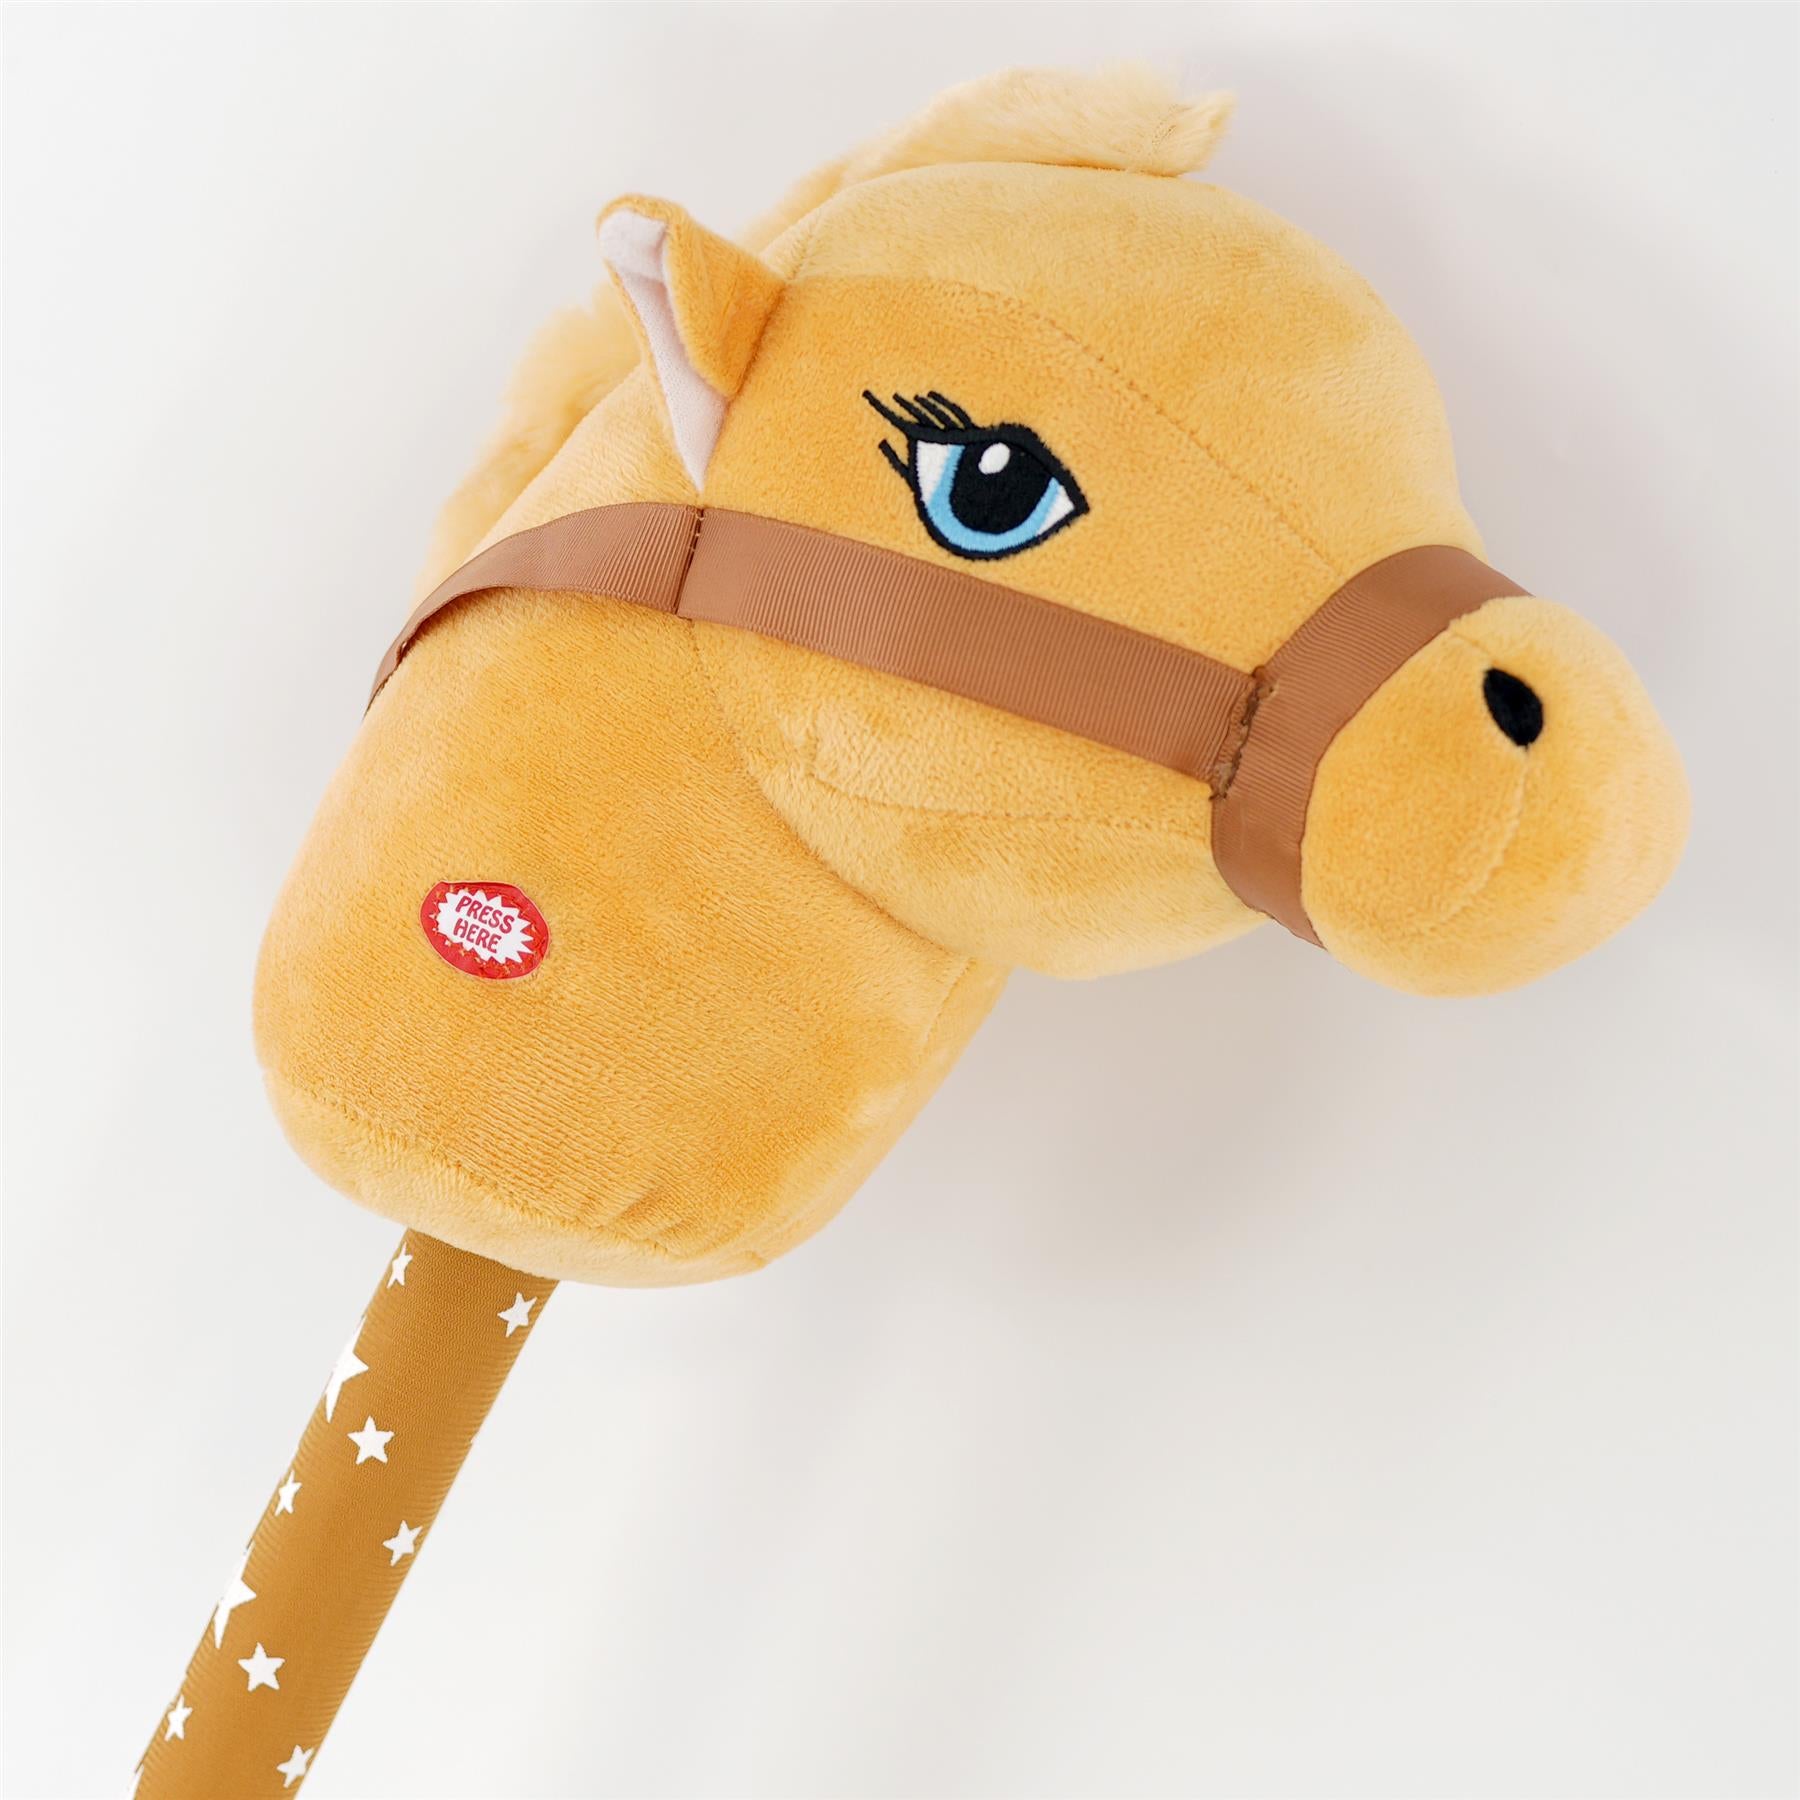 Kids Brown Hobby Horse With Sounds by The Magic Toy Shop - The Magic Toy Shop